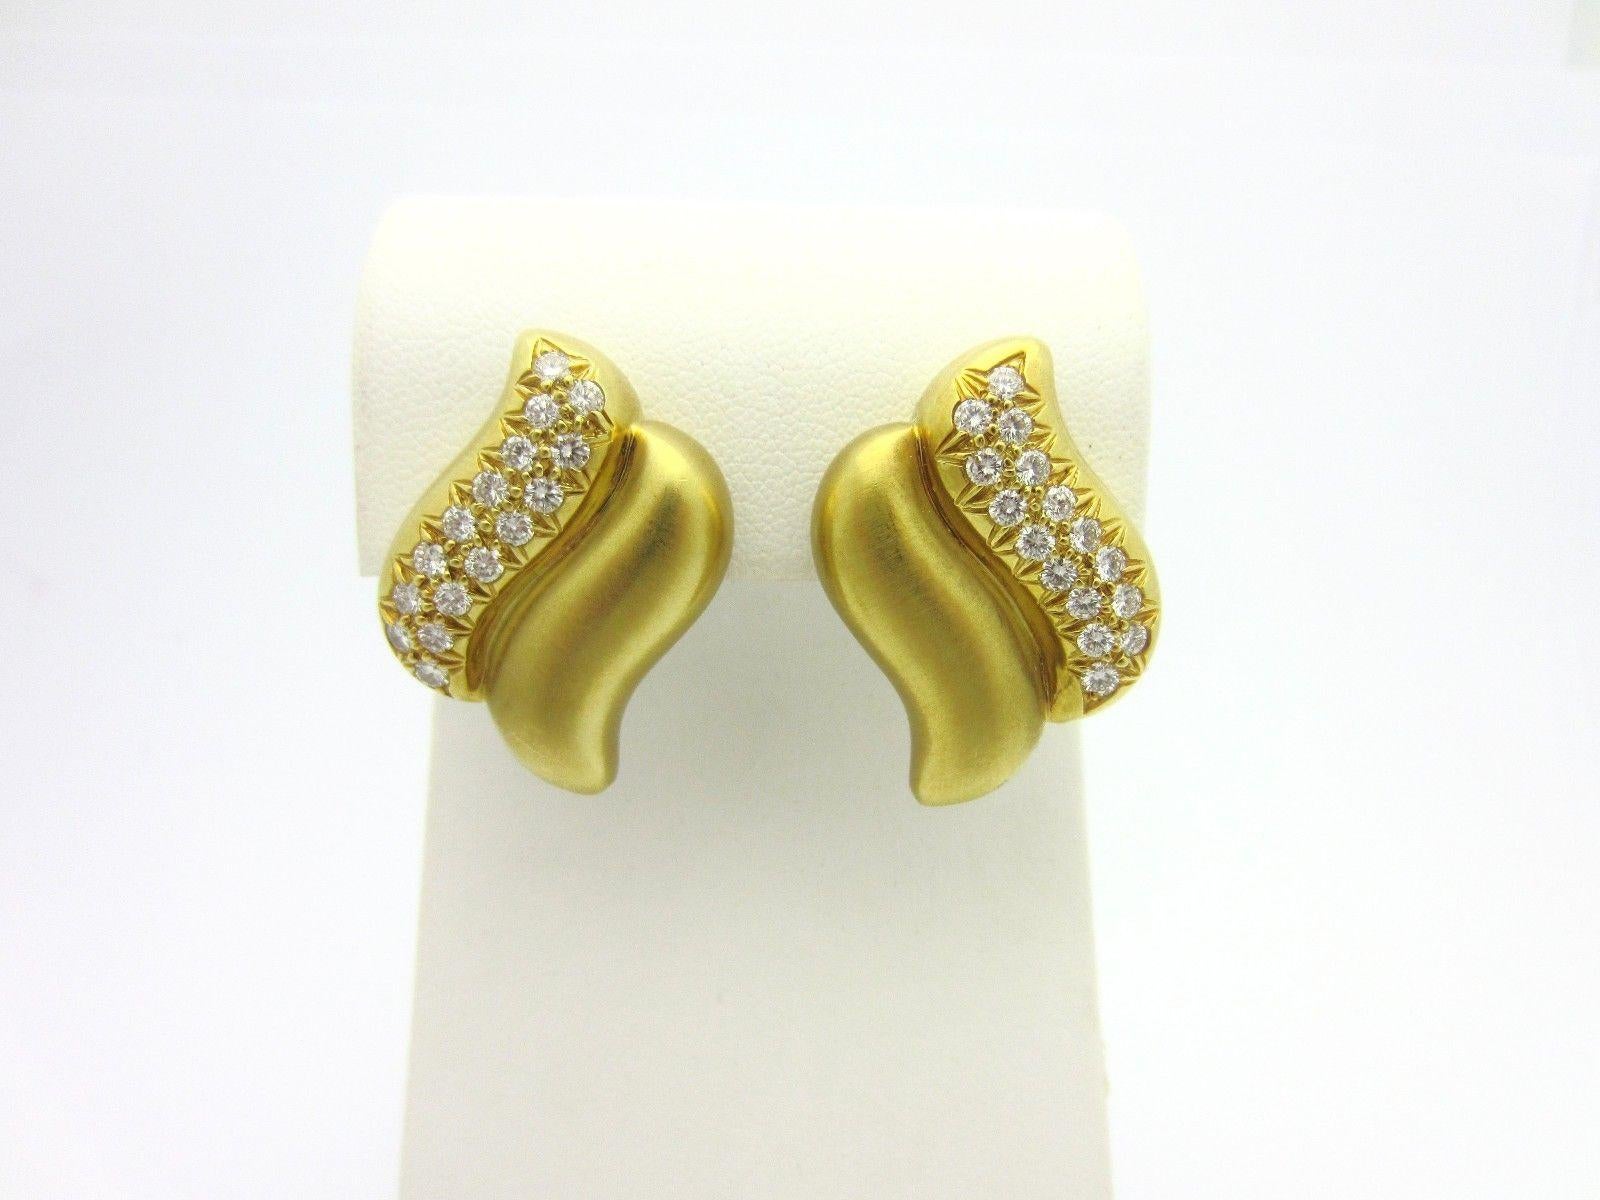 These fantastic 18k yellow gold clip-on earrings by noted designer Marlene Stowe are a classic design.  The earrings are designed as a double wave or 